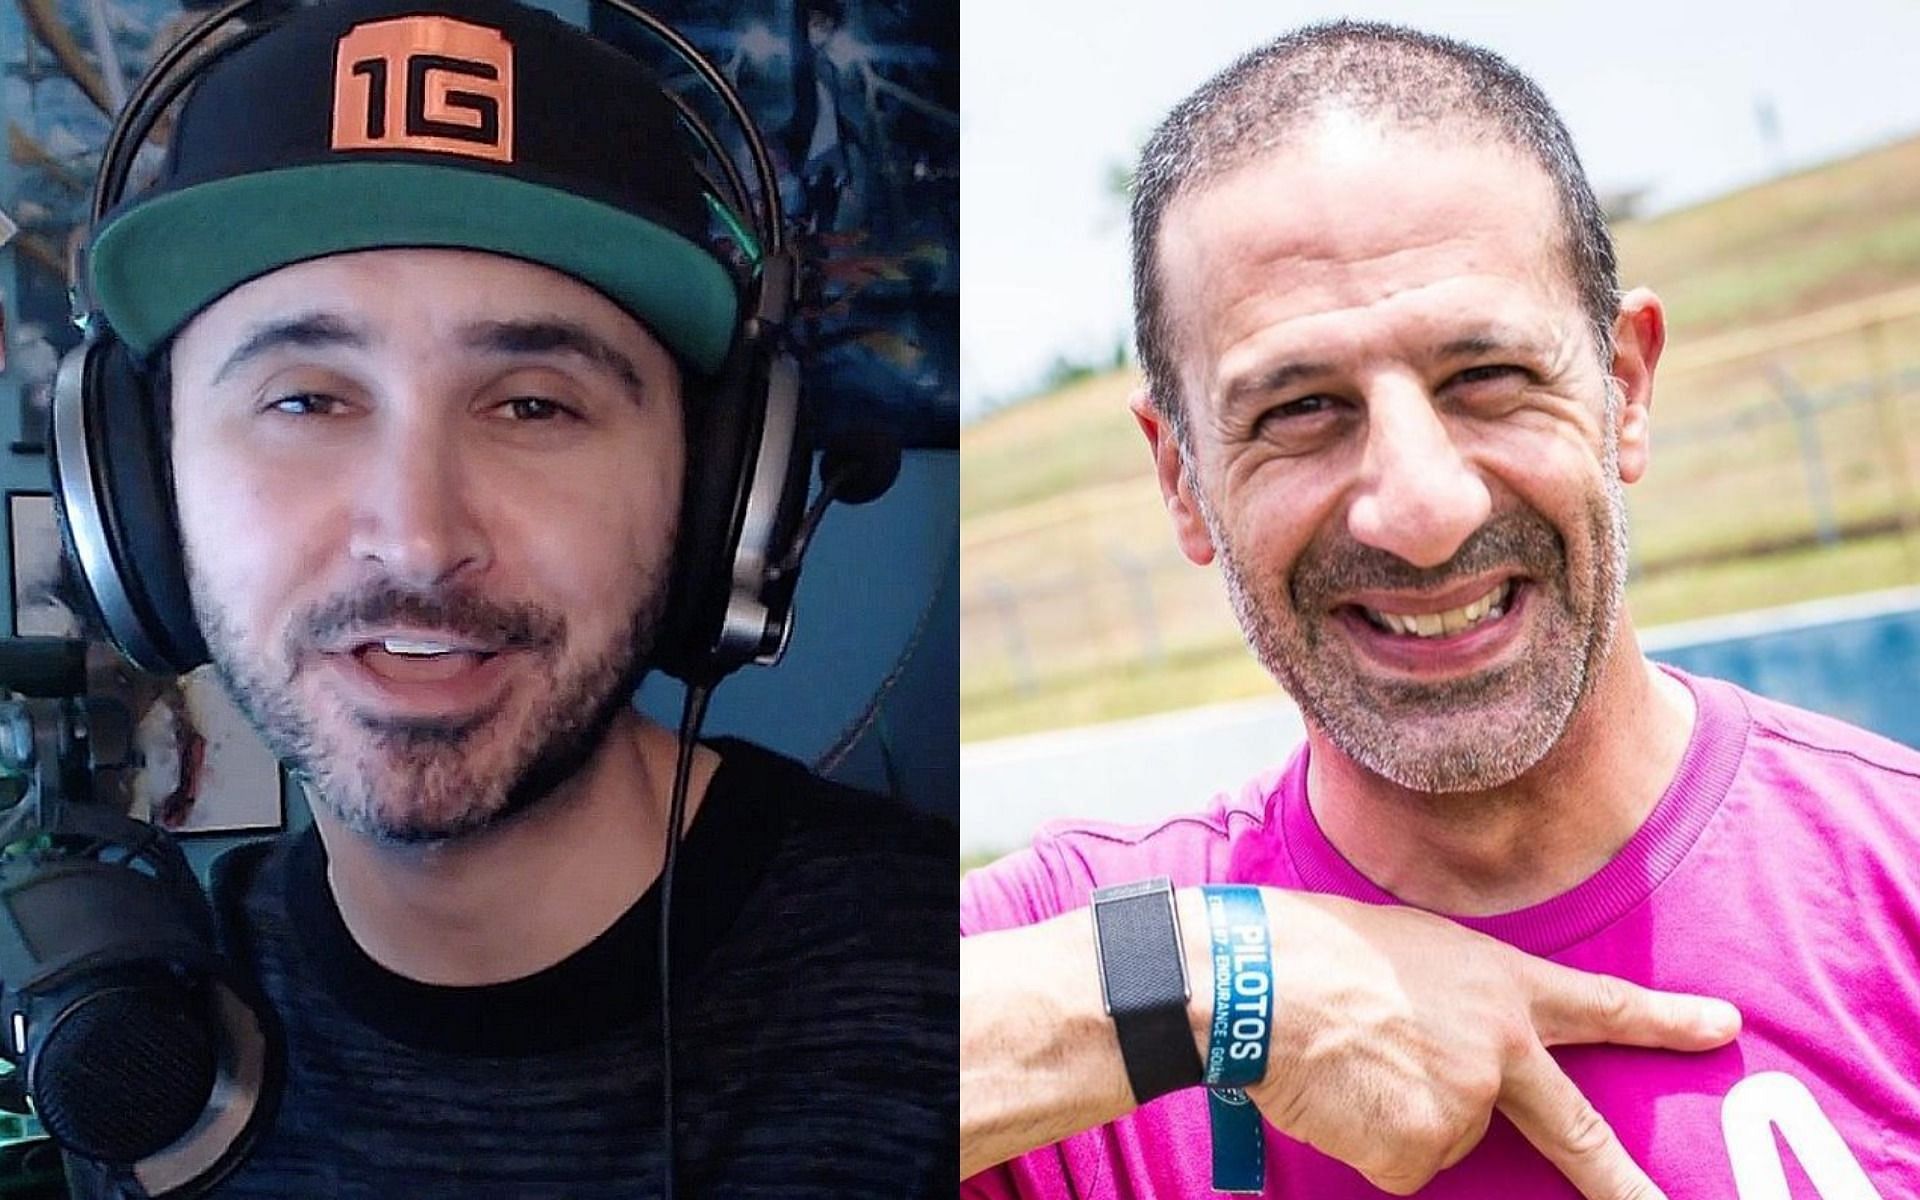 Summit1g to receive guidance and brand new gear from Tony Kanaan (Images via Twitch/summit1g, Instagram/tkanaan)